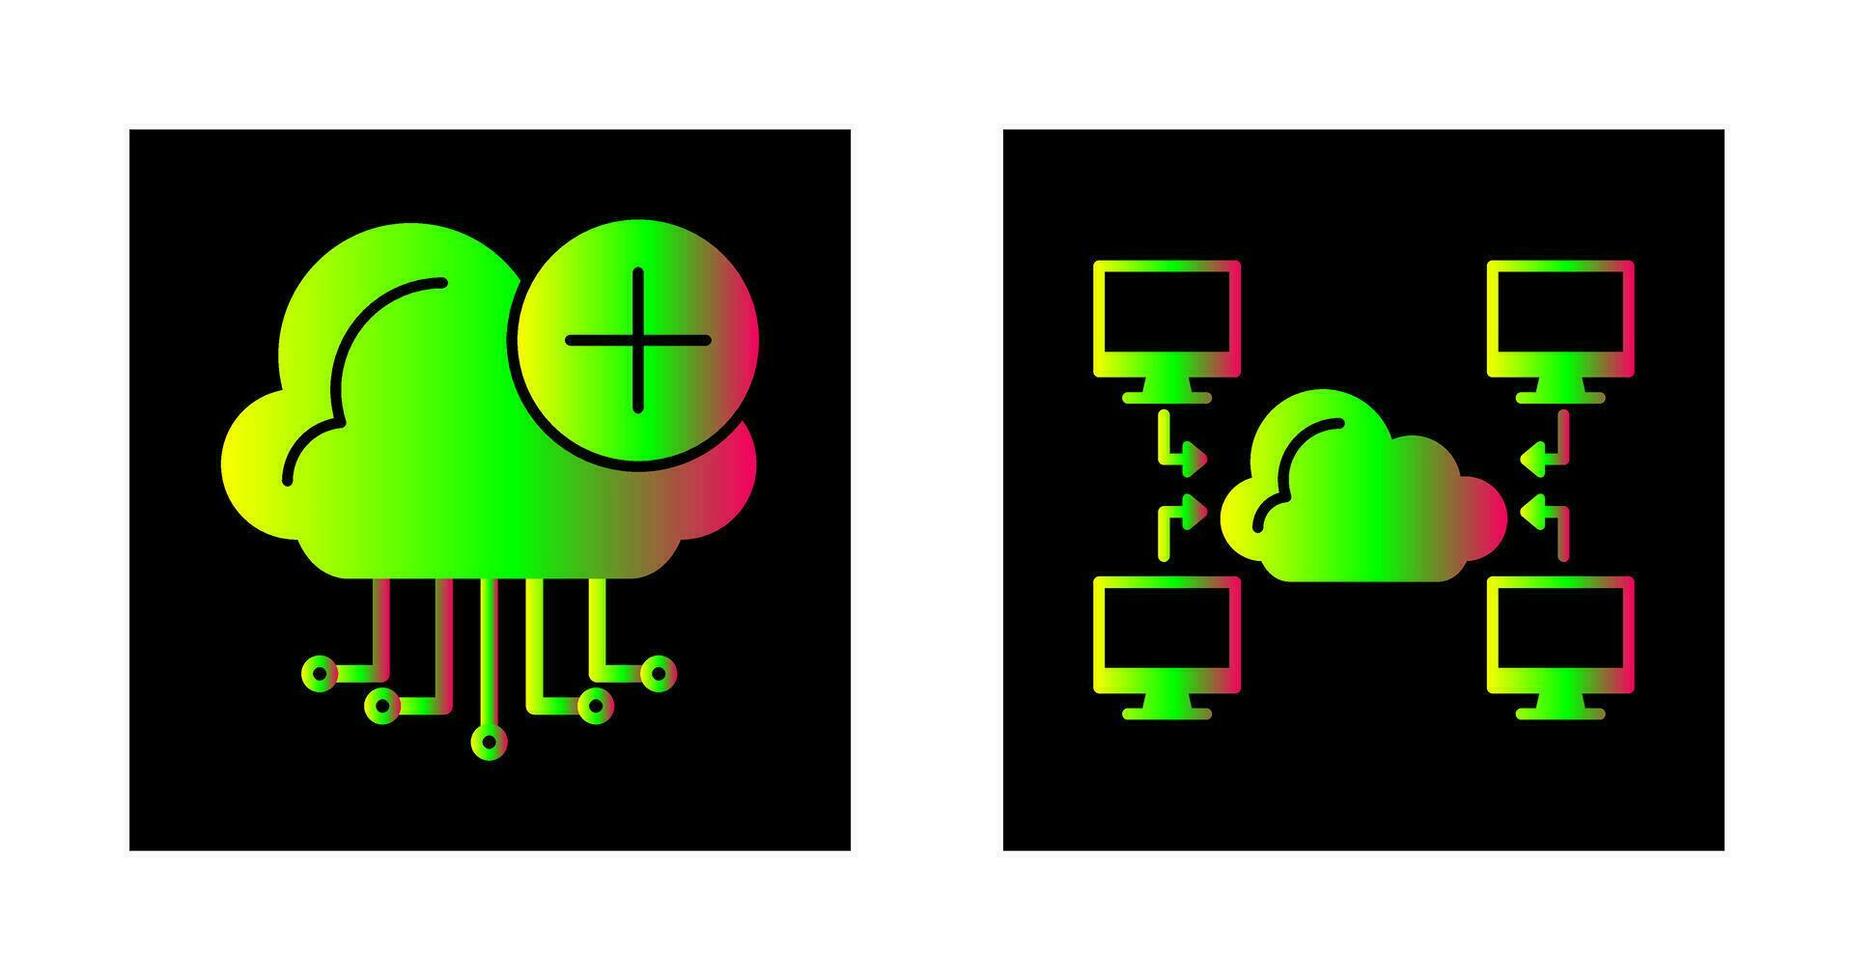 Cloud Computing and Computer  Icon vector